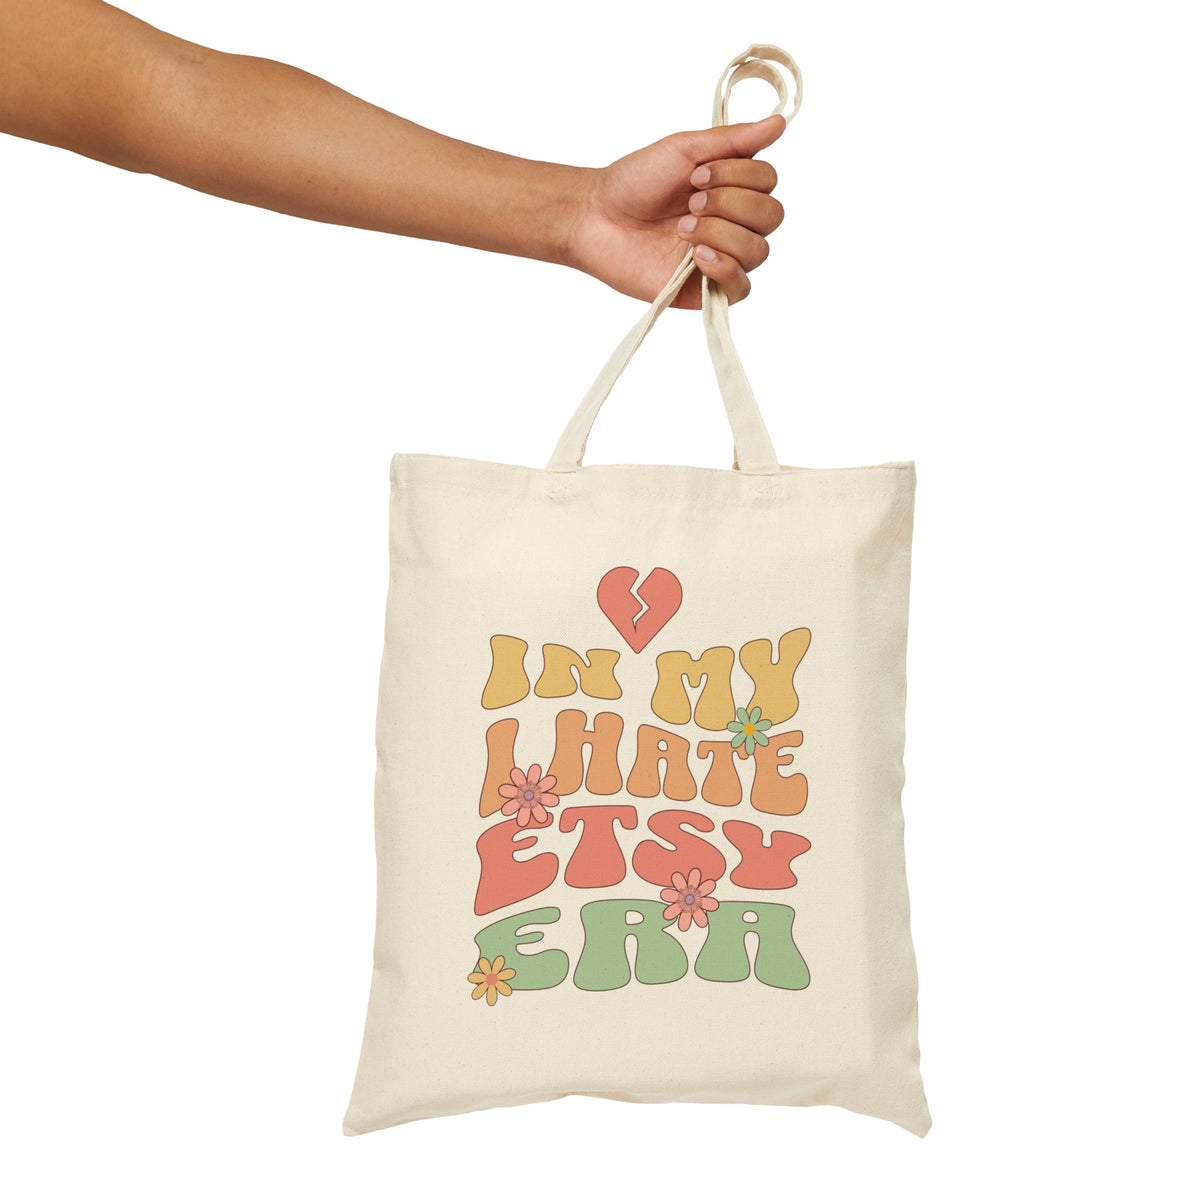 In My I Hate Etsy Era Funny Etsy Seller Tote Bag | Cotton Canvas Tote Bag